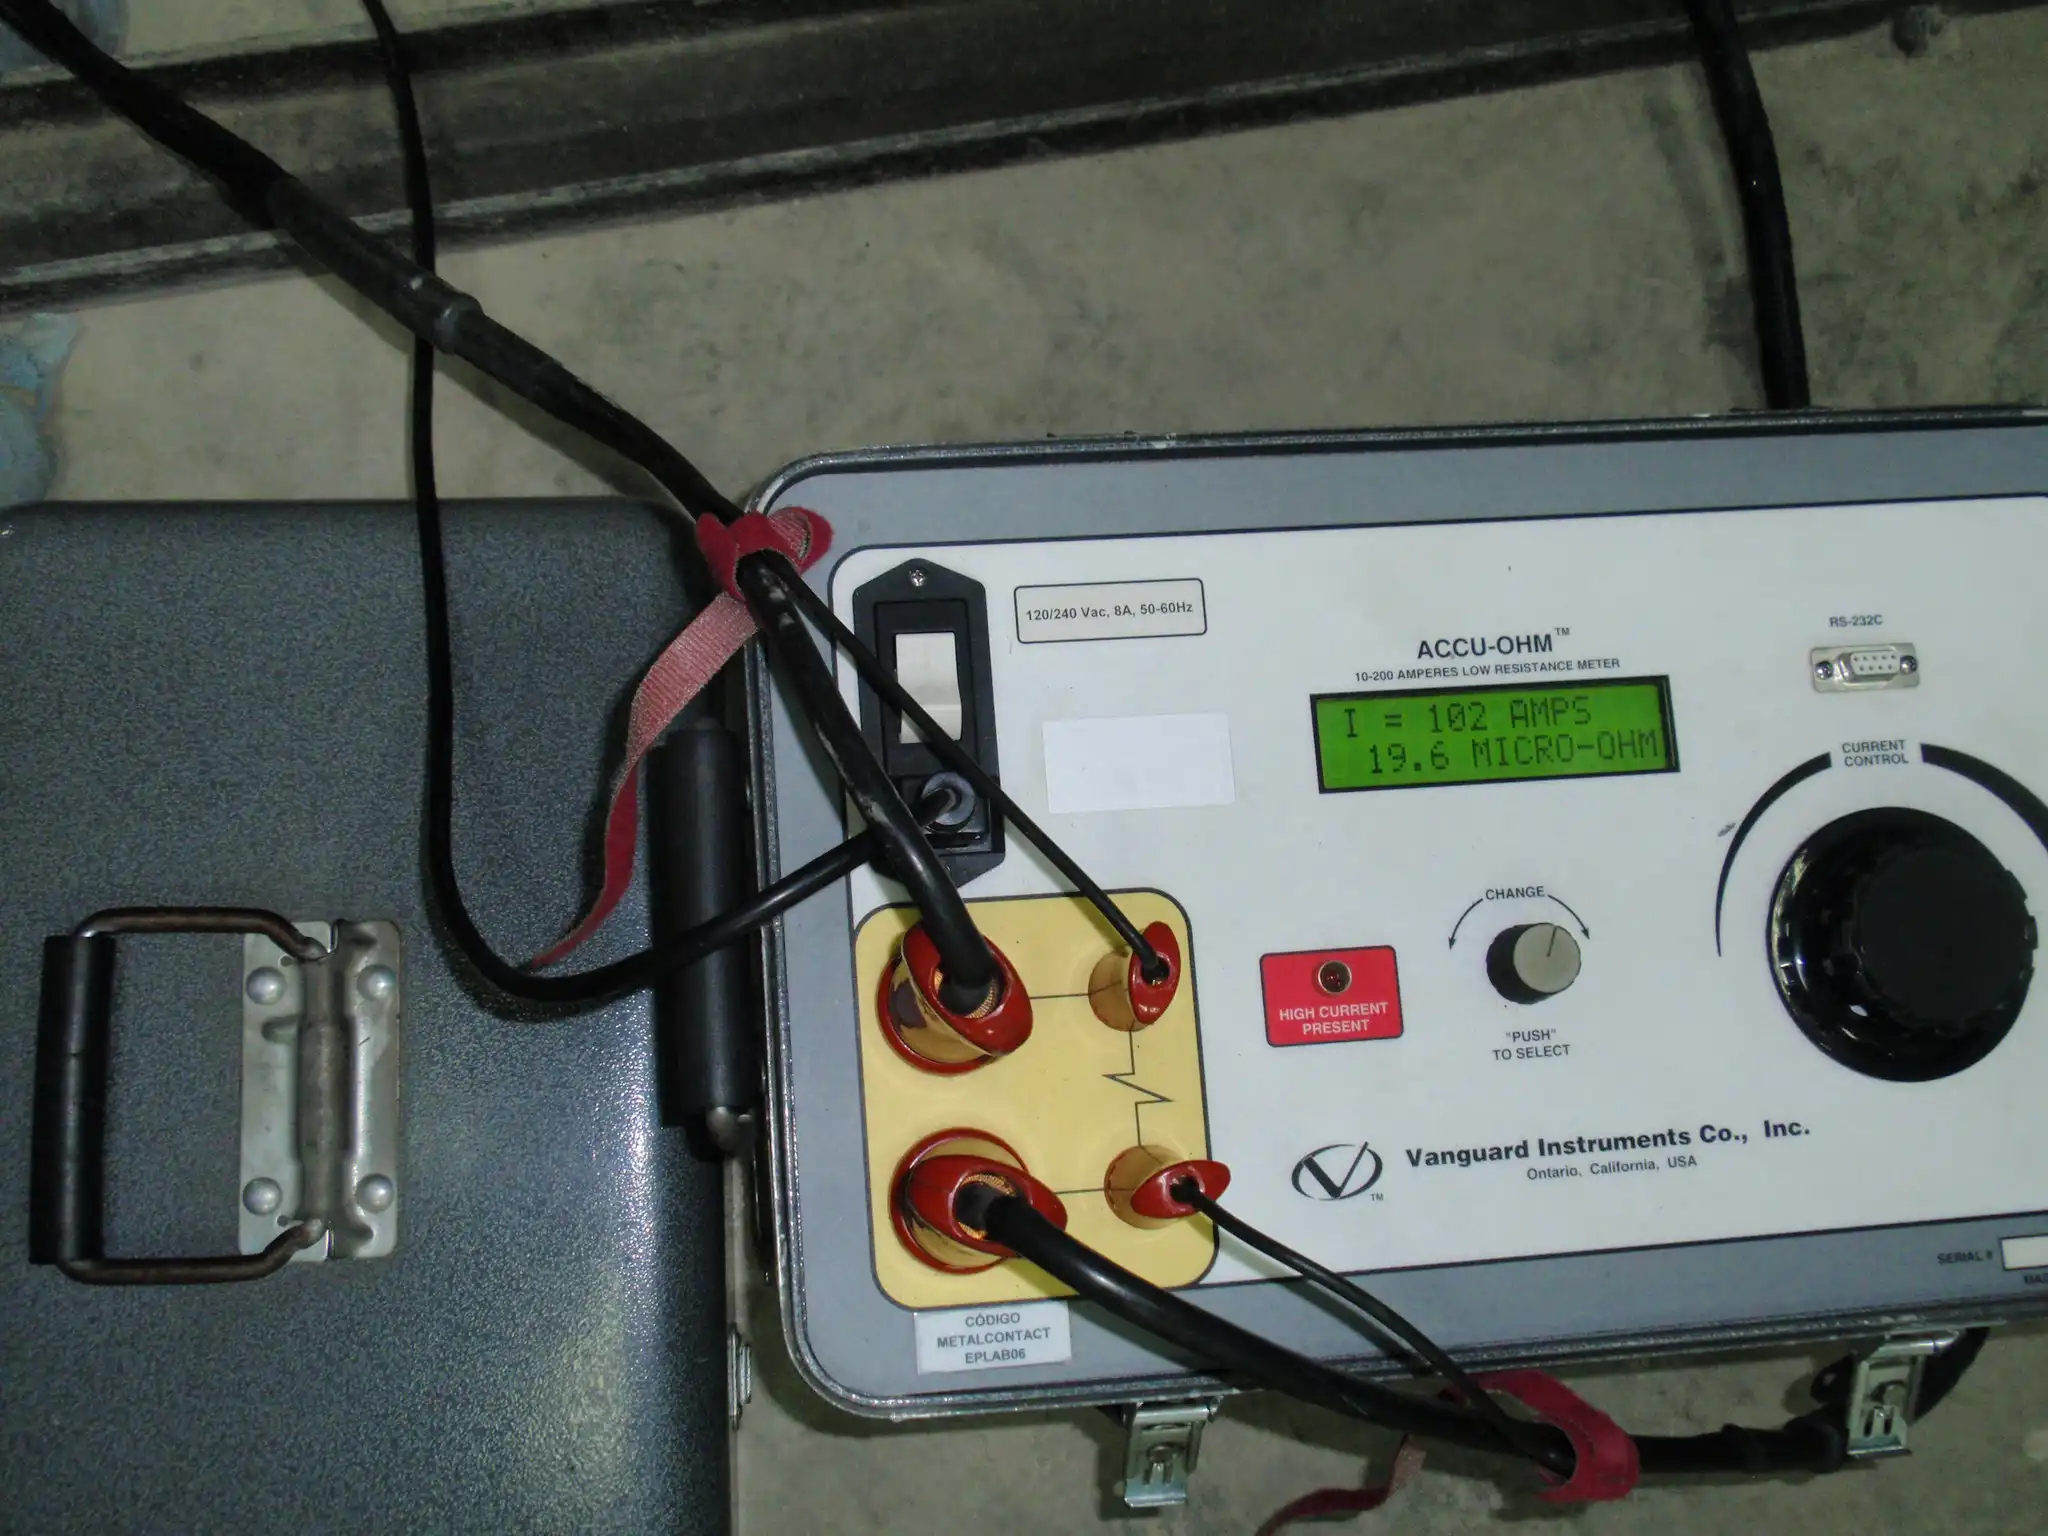 Contact Resistance Test Equipment